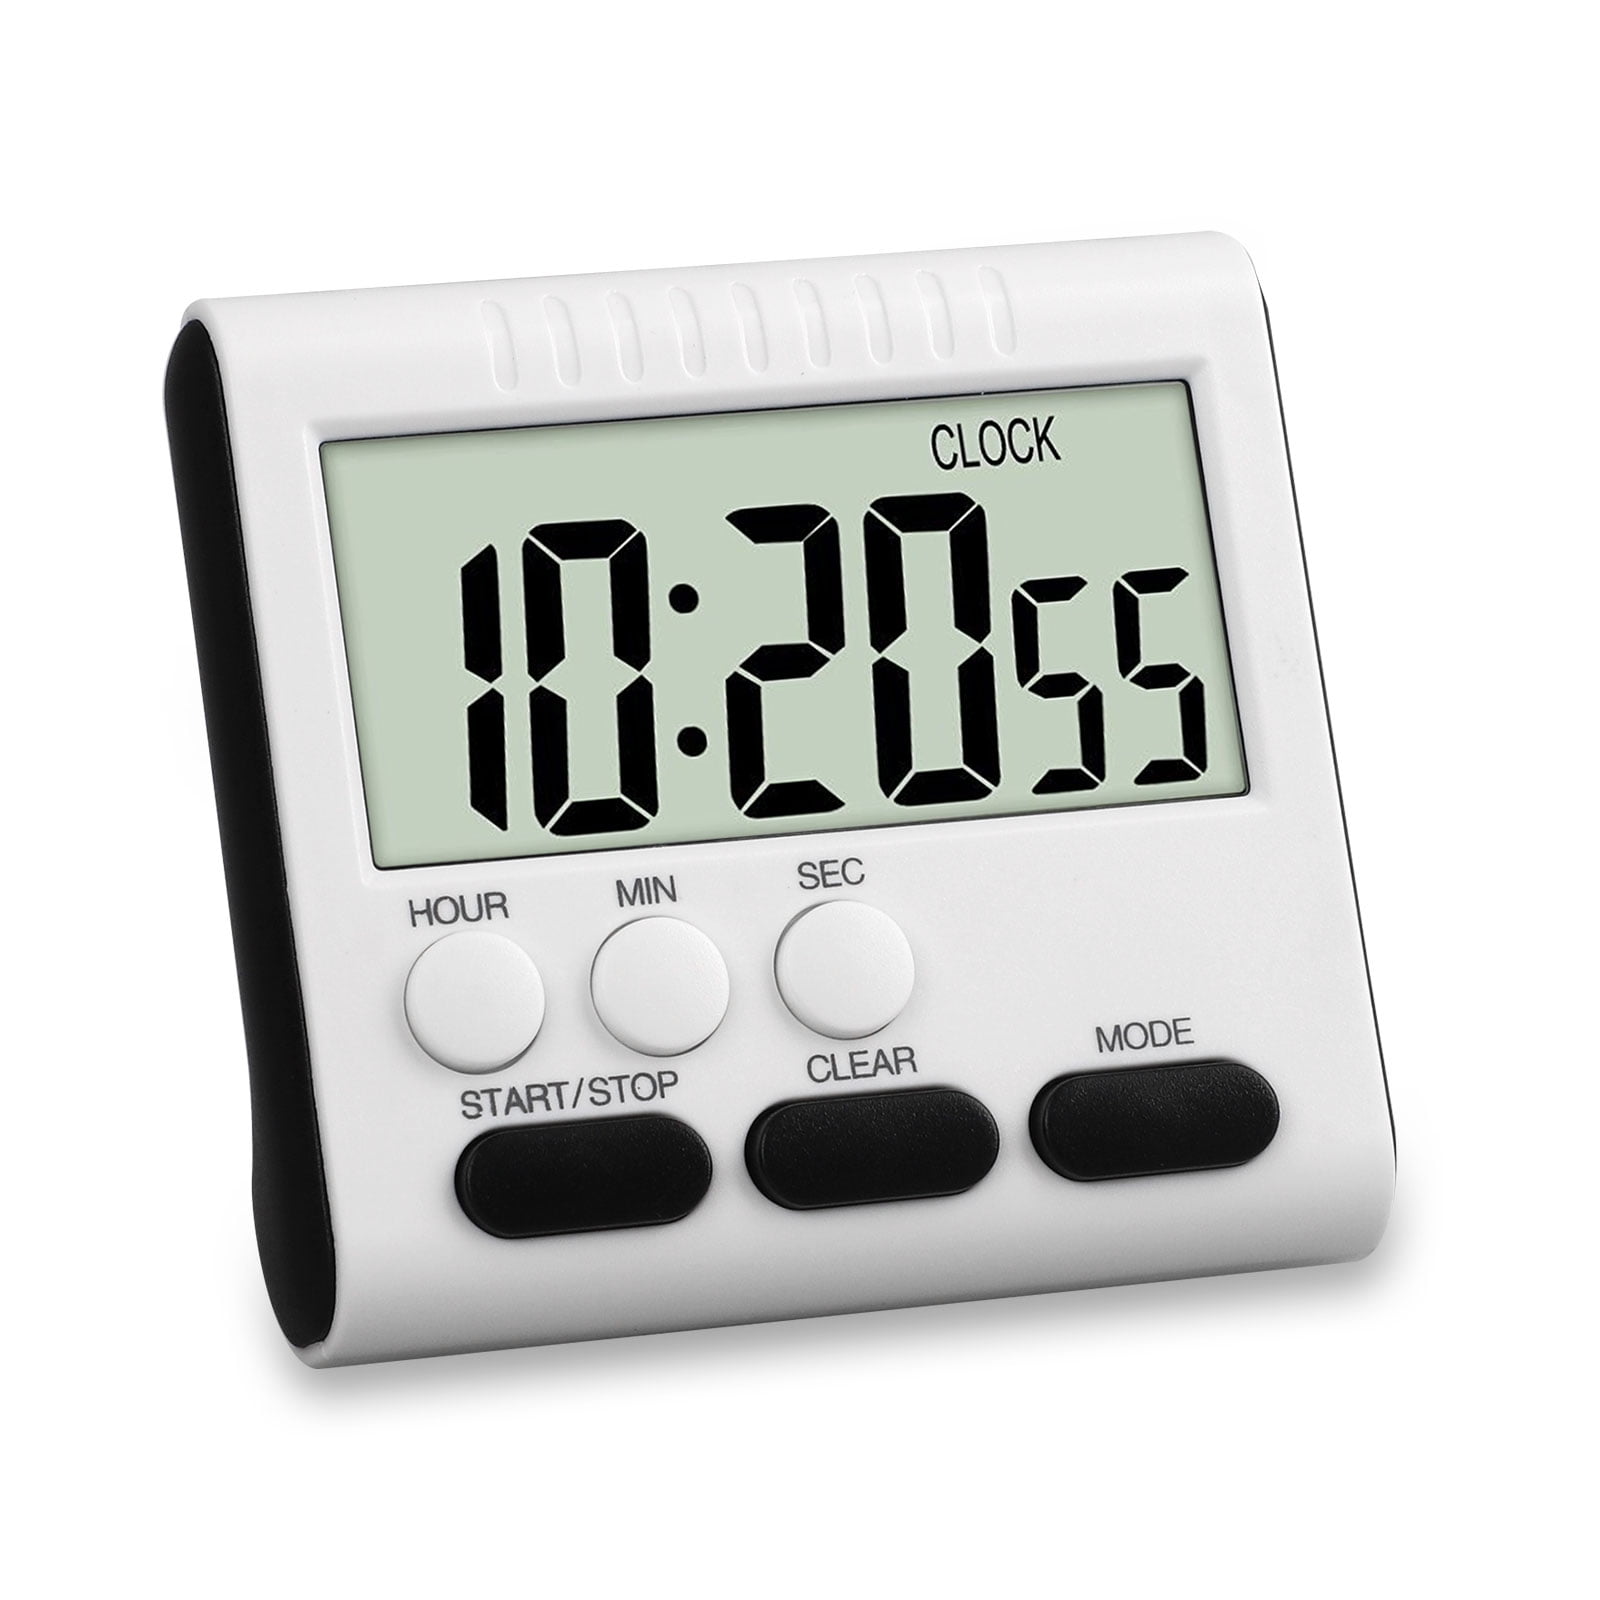 Toorise Kitchen Timers Magnetic Countdown Large LCD Display Digital Timer 3 in 1 Clock & Alarm Cooking Timer 24-hours Digital Timer Retractable Stand